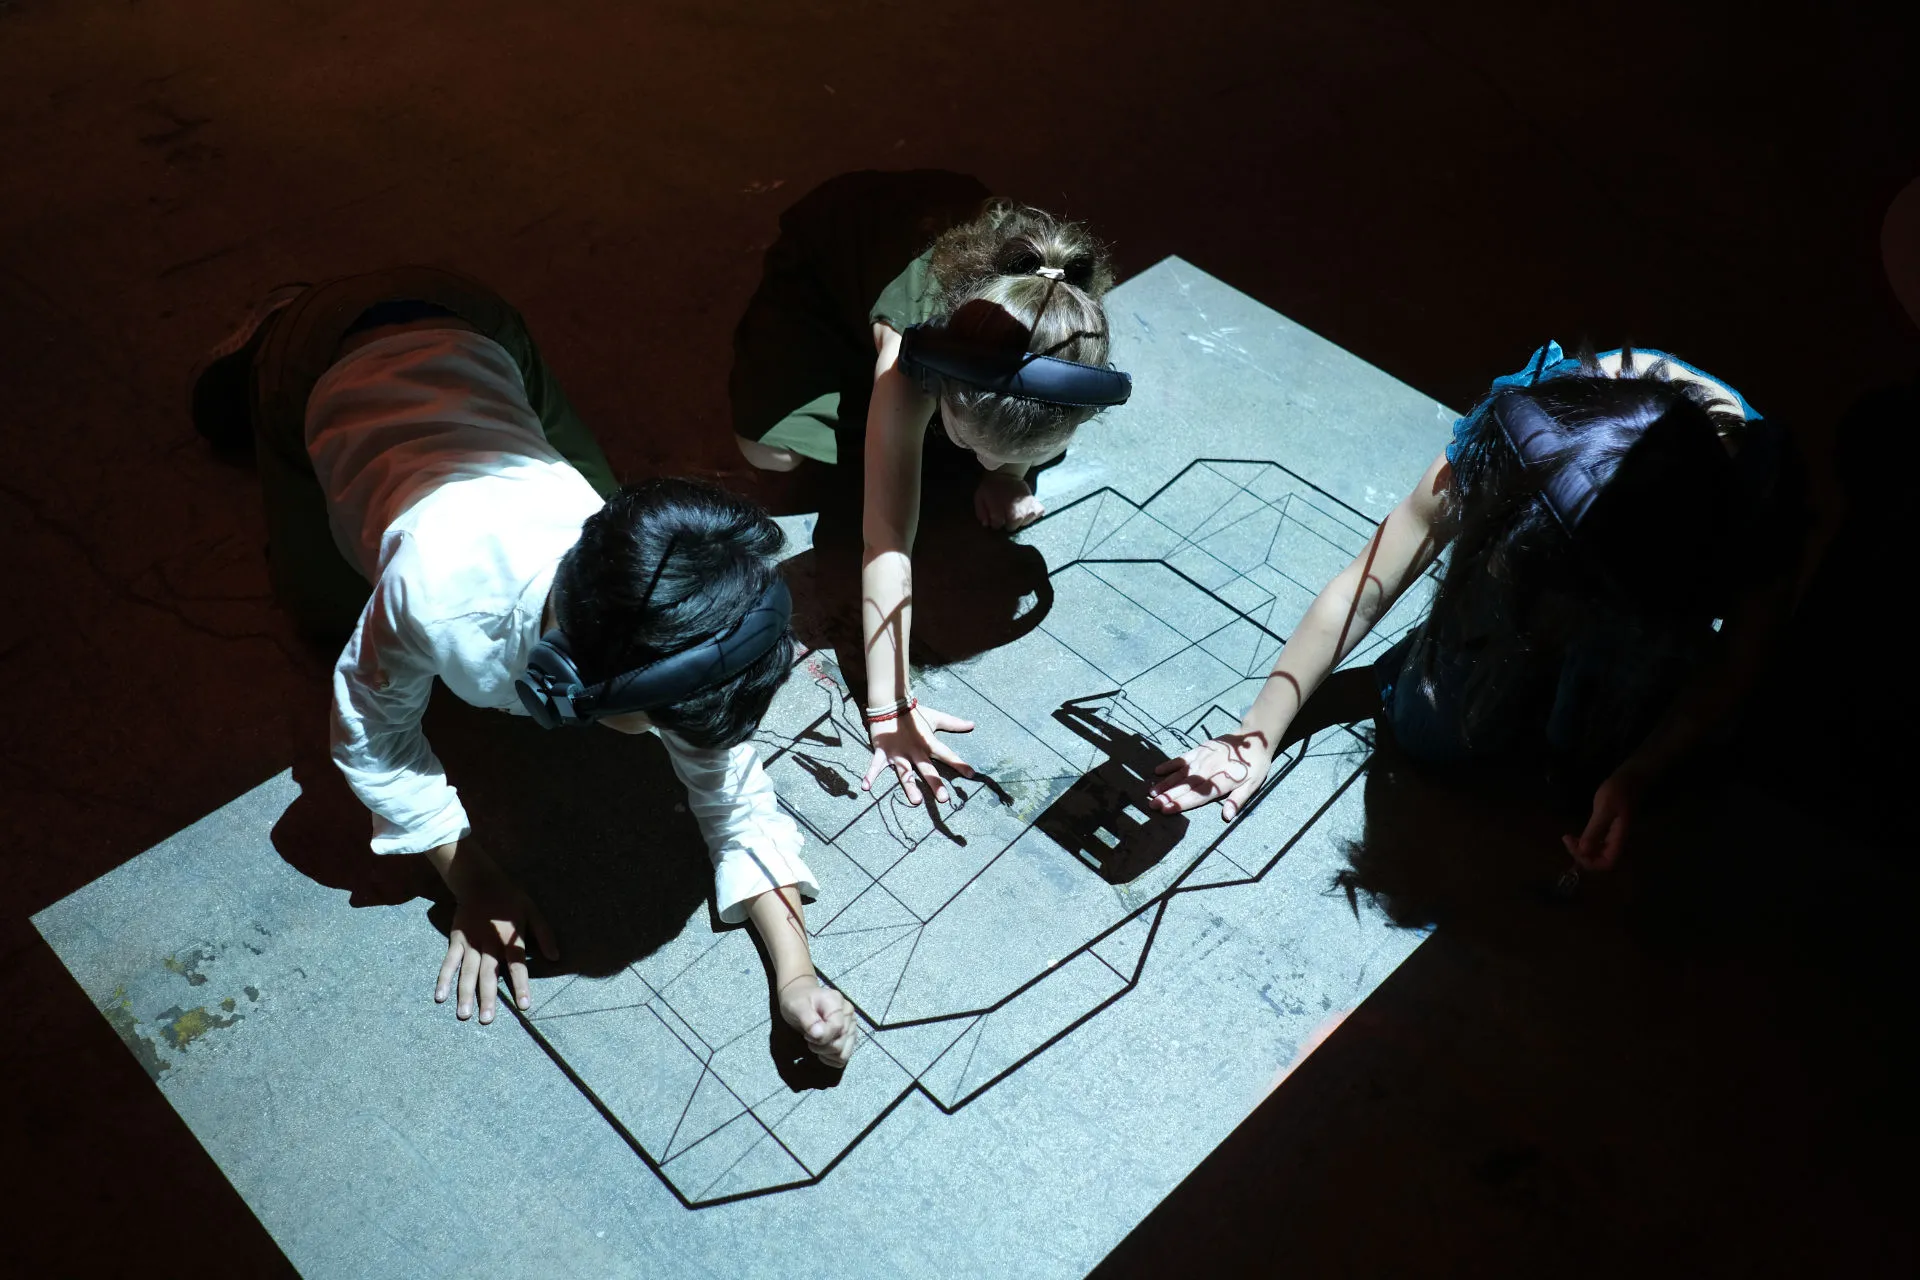 Kids touching the floor and playing over the projection of the New Extractivism piece